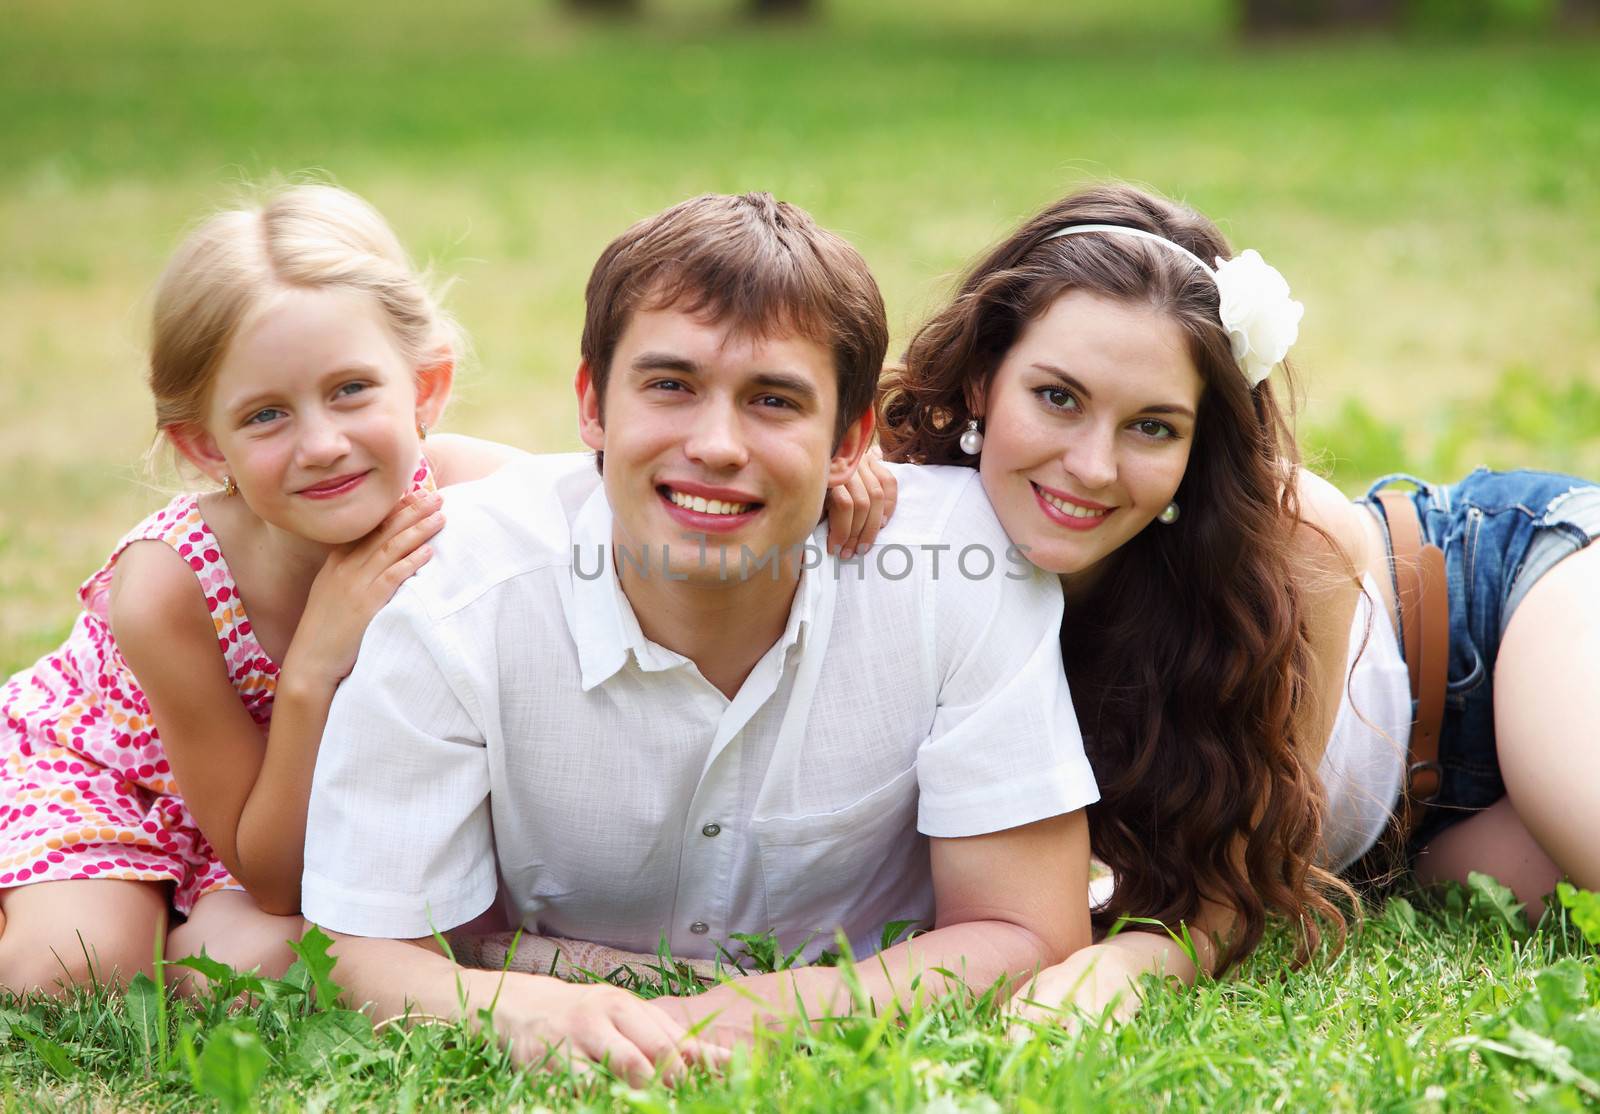 Young Family Outdoors Walking Through Park in summer